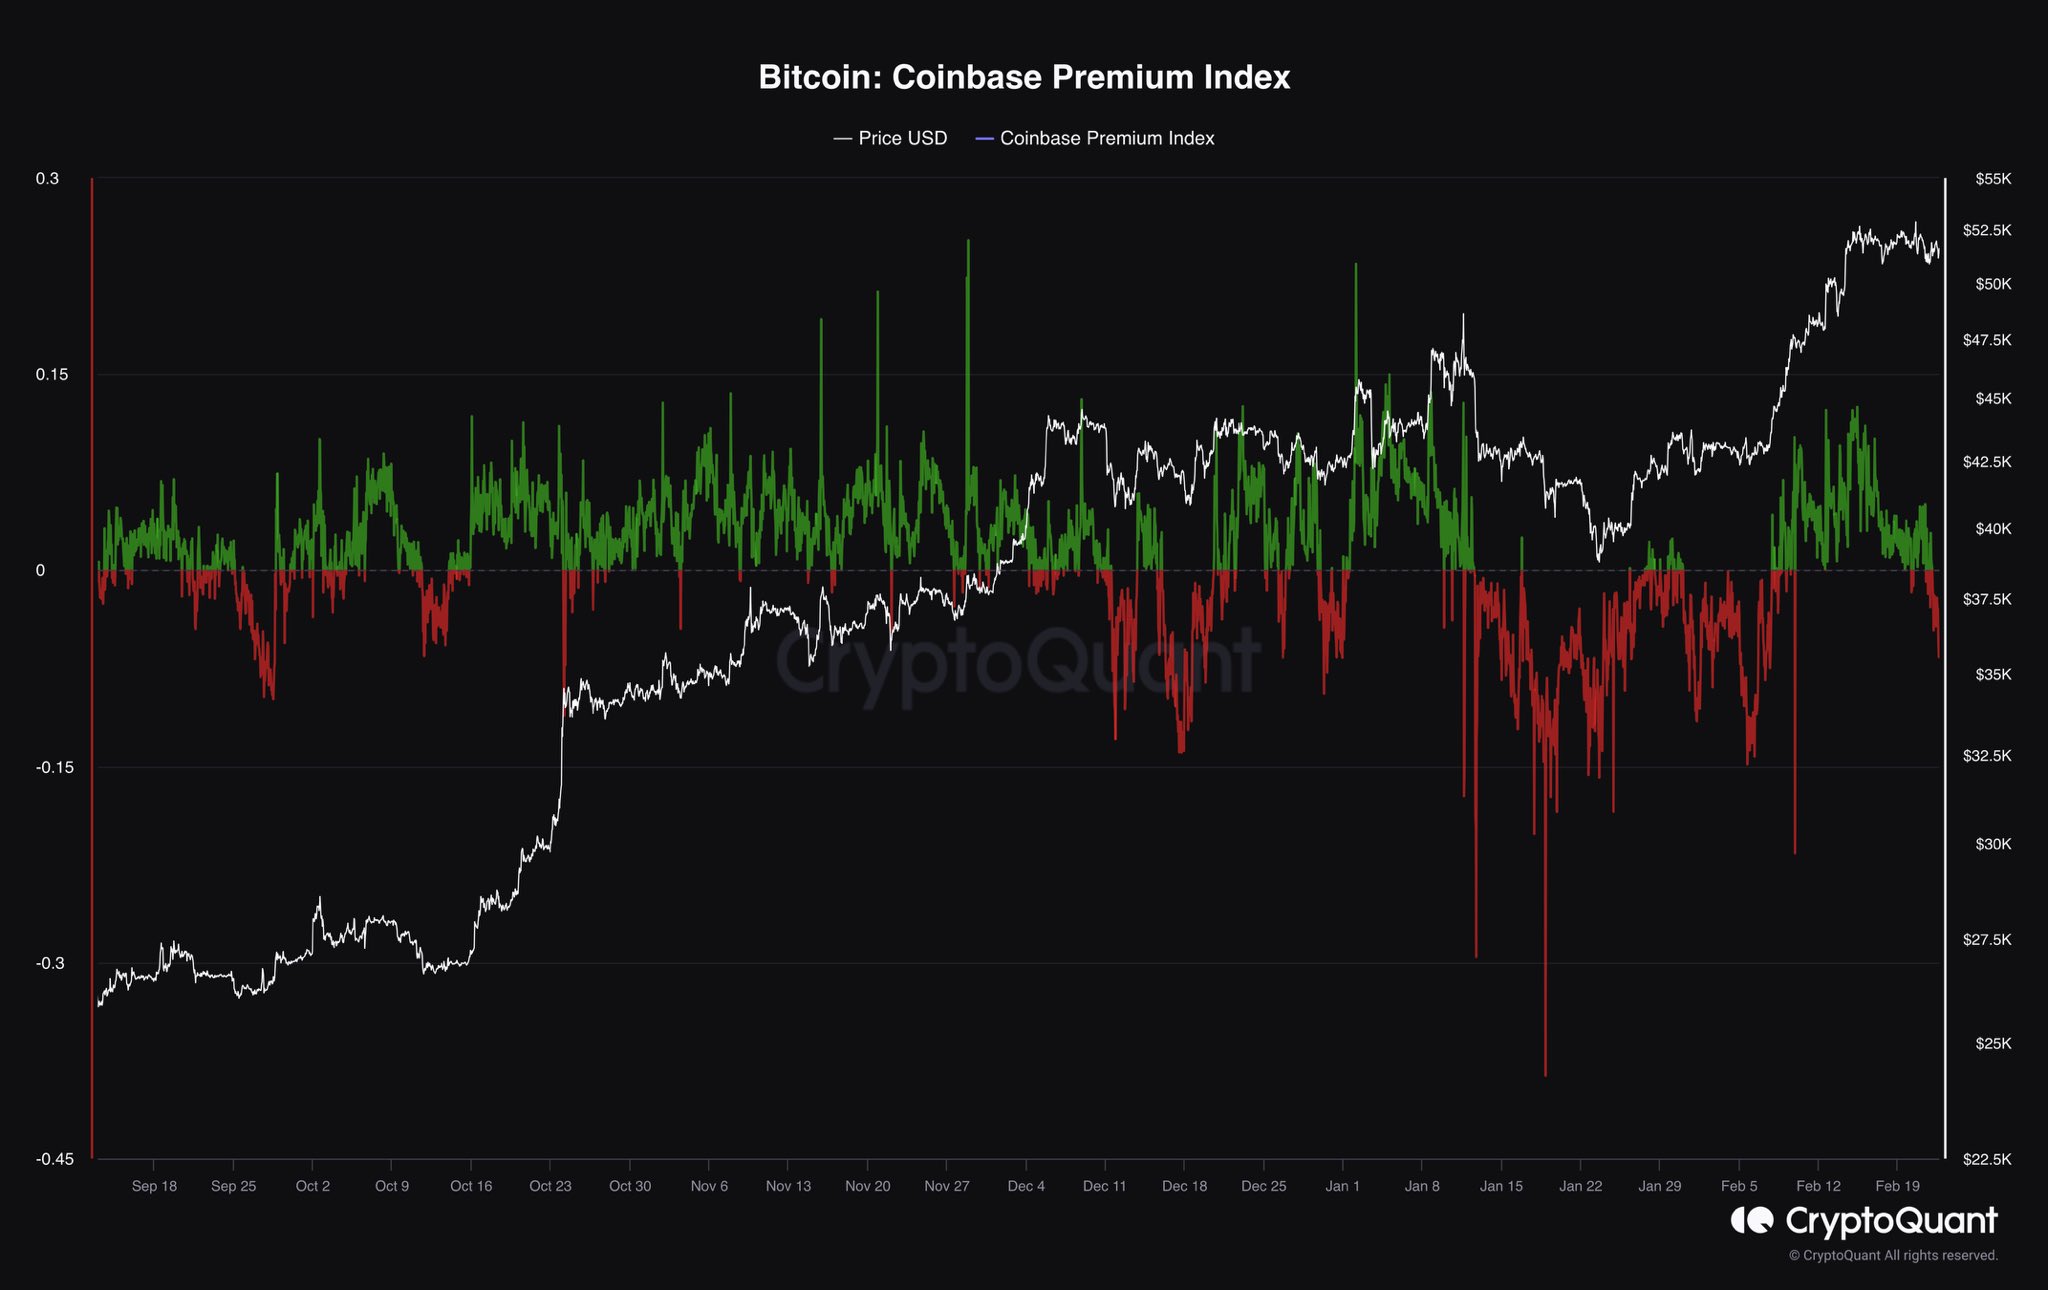  coinbase bitcoin premium index price pointed out 